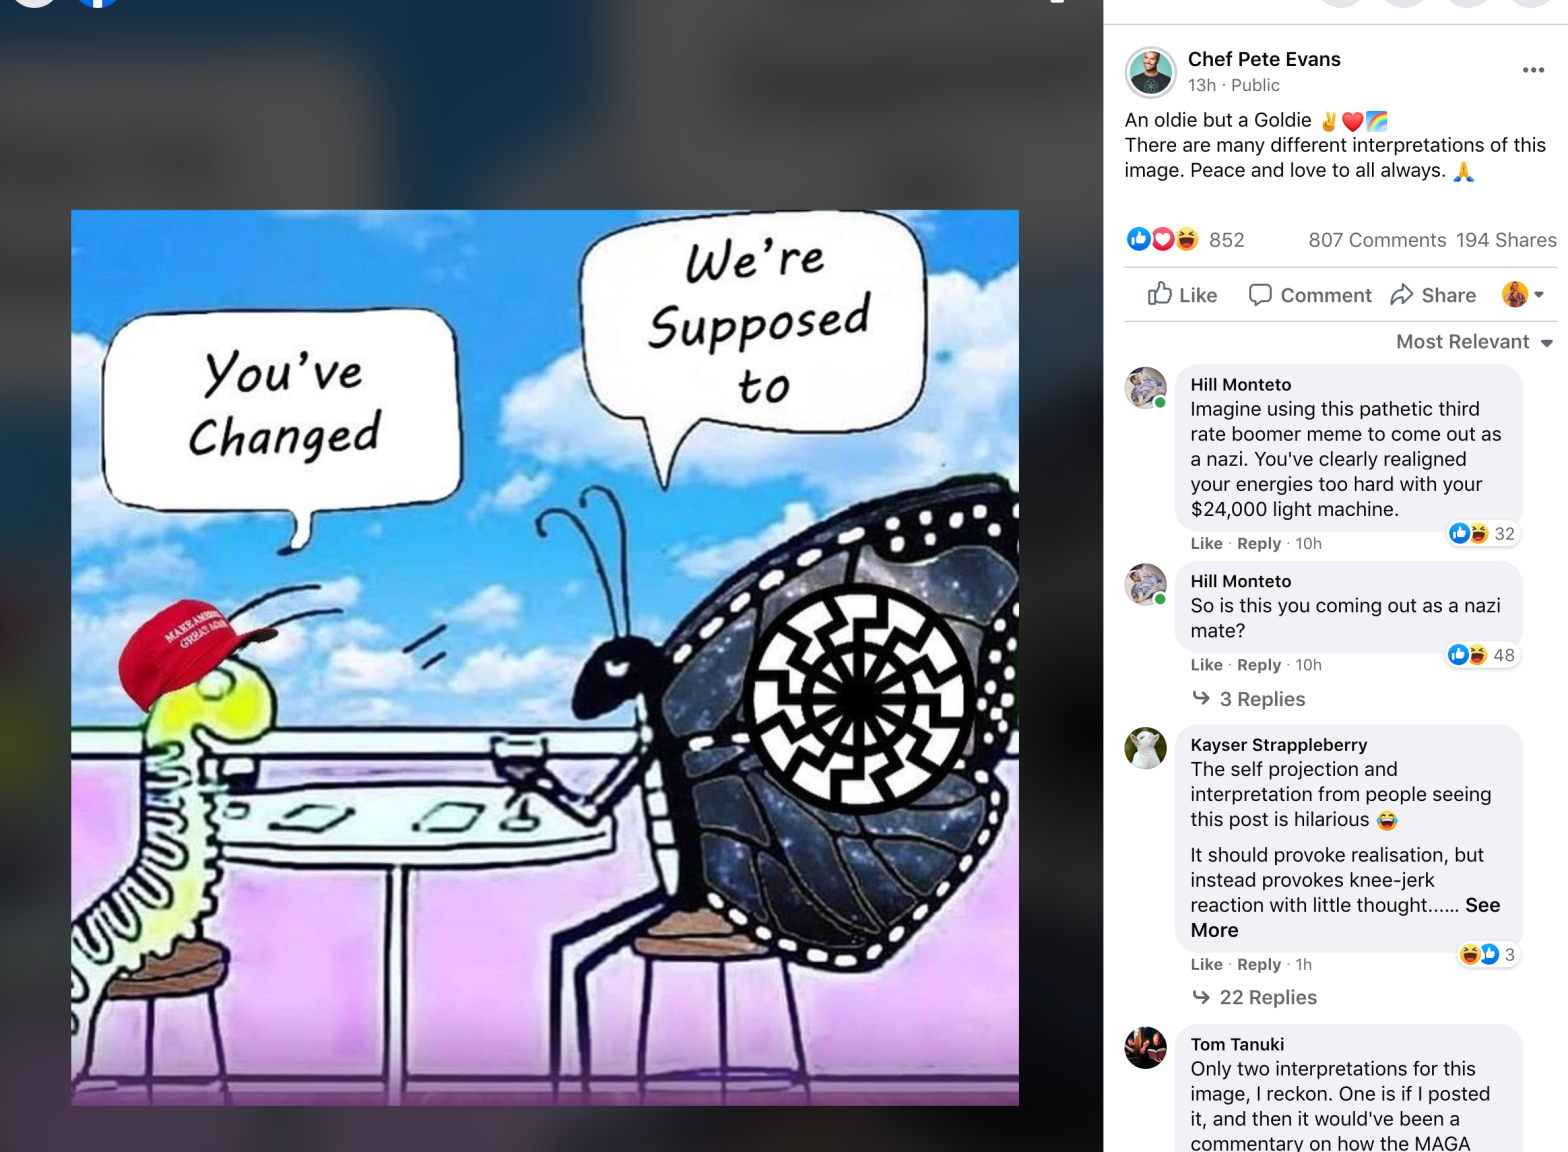 A cartoon posted by Pete Evans featuring a neo nazi symbol